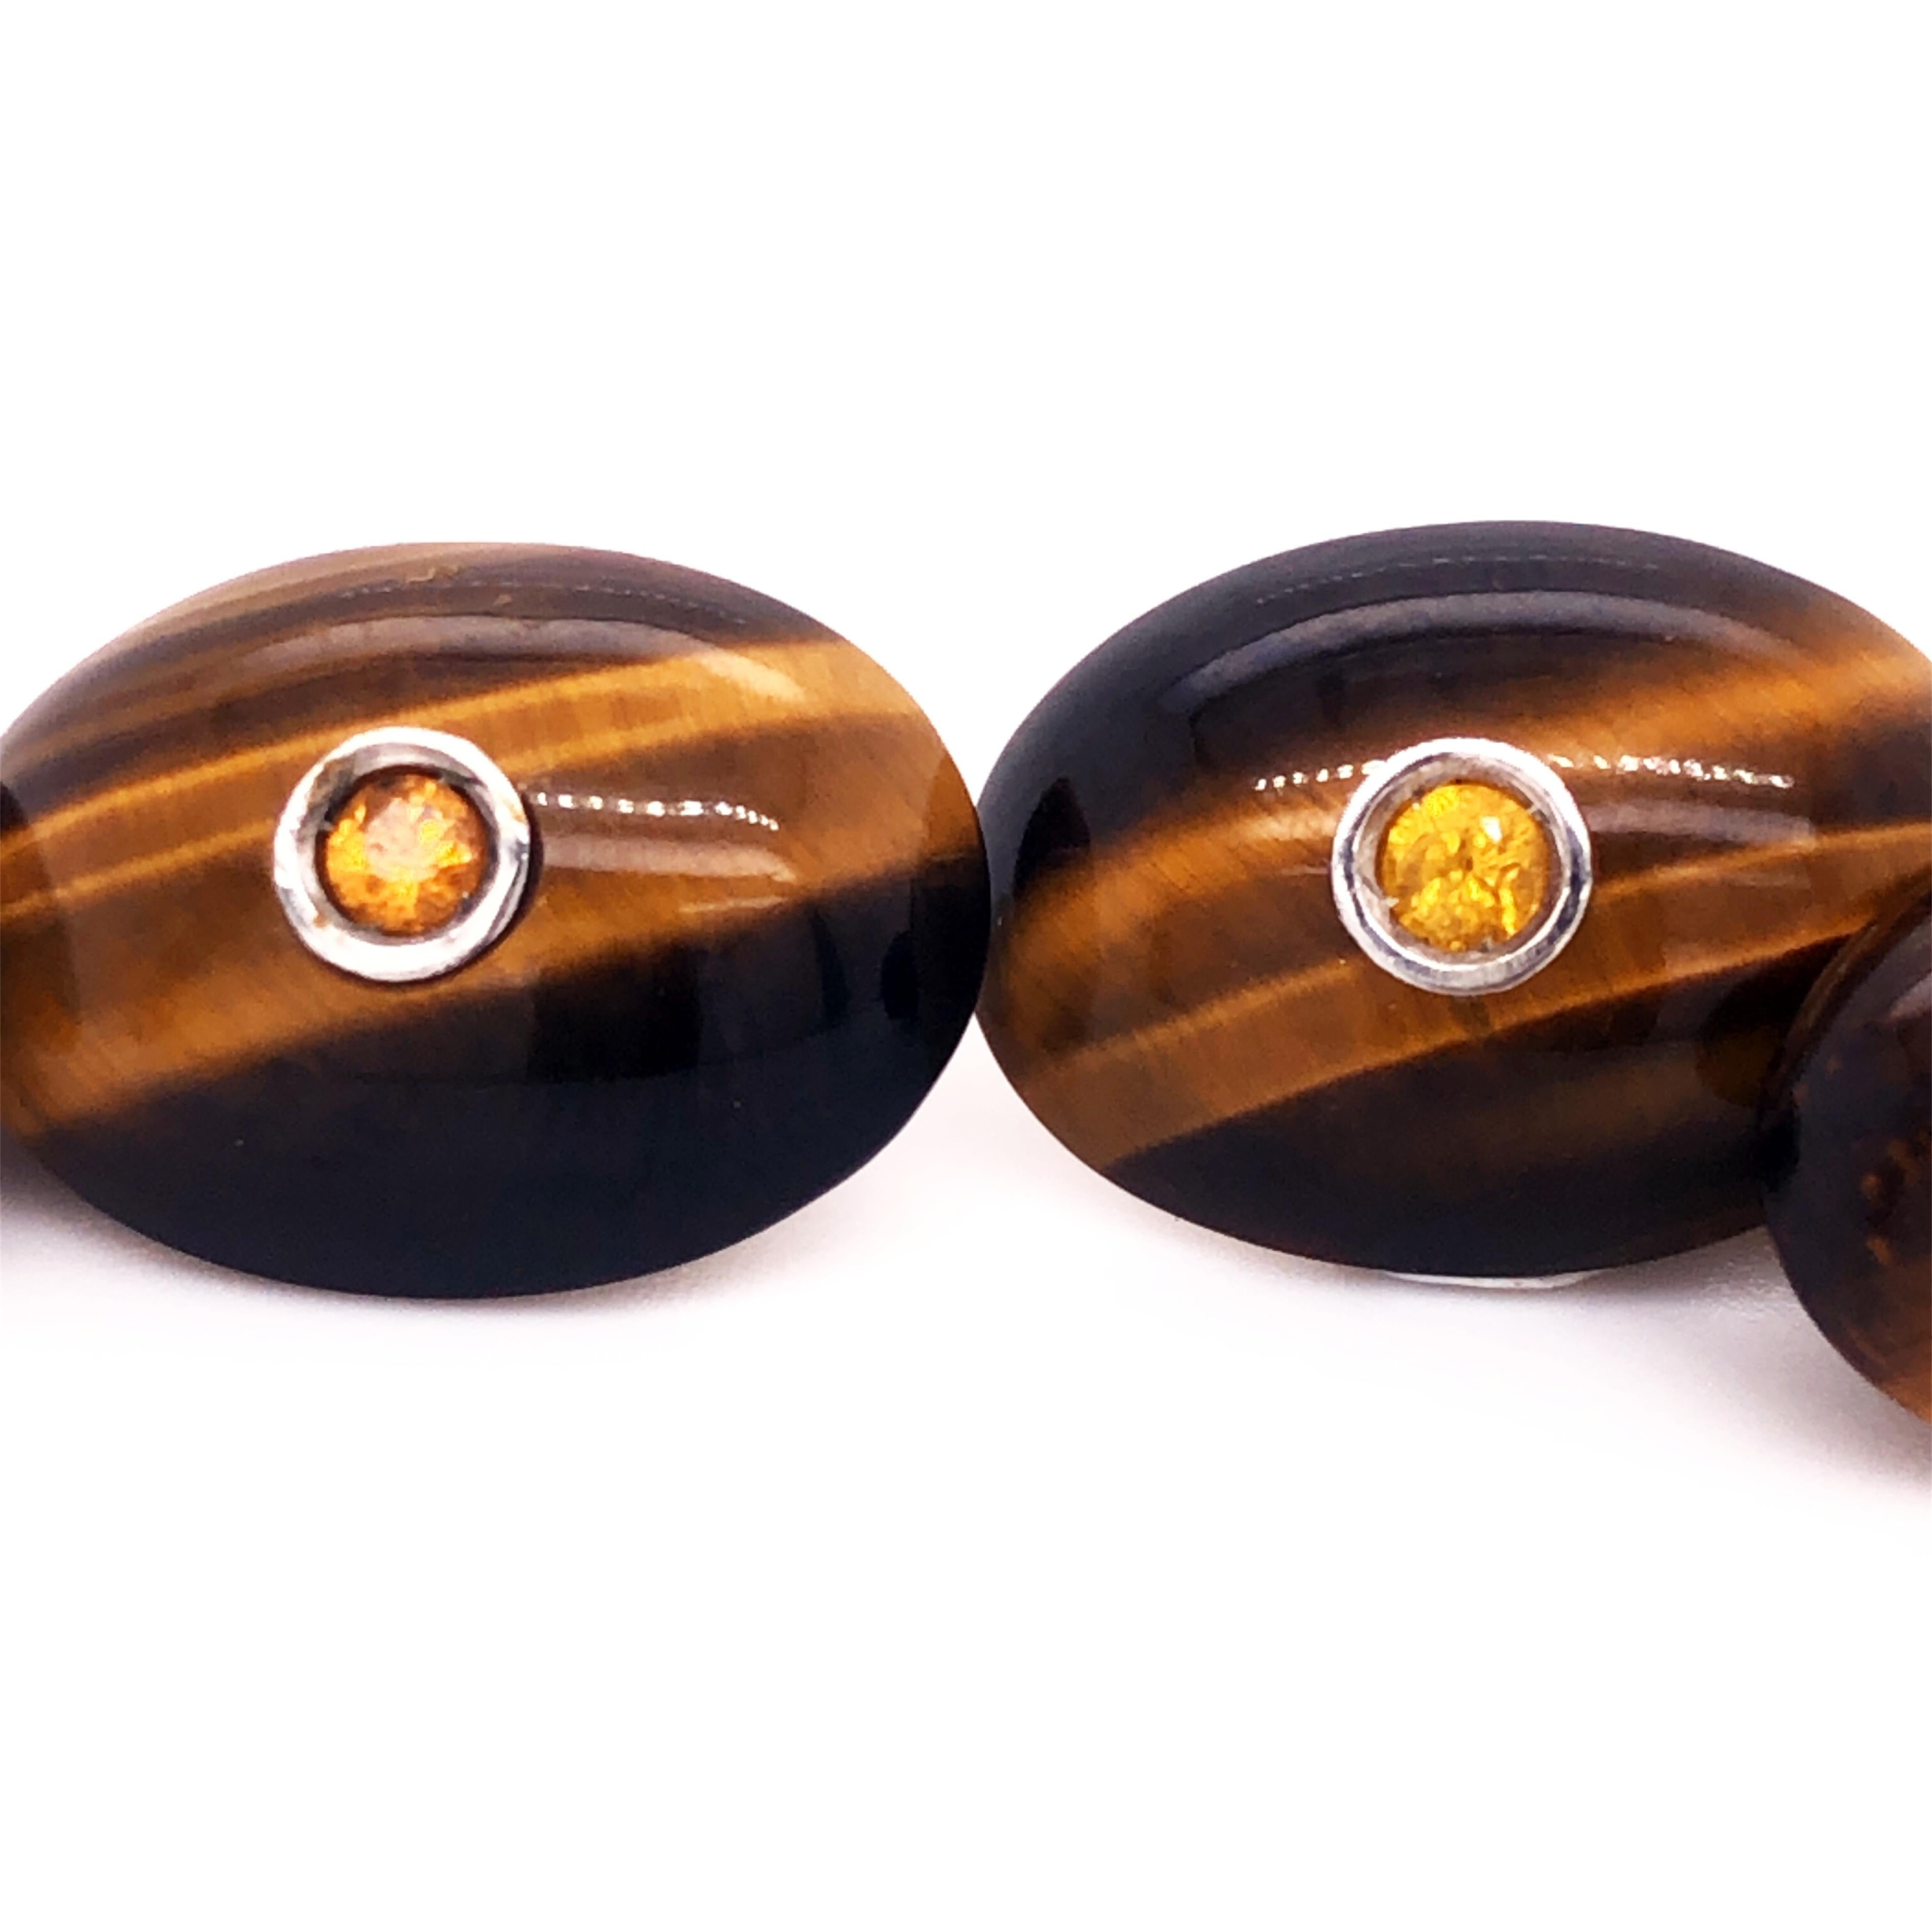 Absolutely Chic, Classy yet Timeless Oval Shaped Hand Inlaid Natural Tiger's Eye Cufflinks featuring four natural 0.48 Carat Brilliant Cut Yellow Sapphire in a White Gold setting.
All our Cufflinks are new, never been previously owned or worn, gift